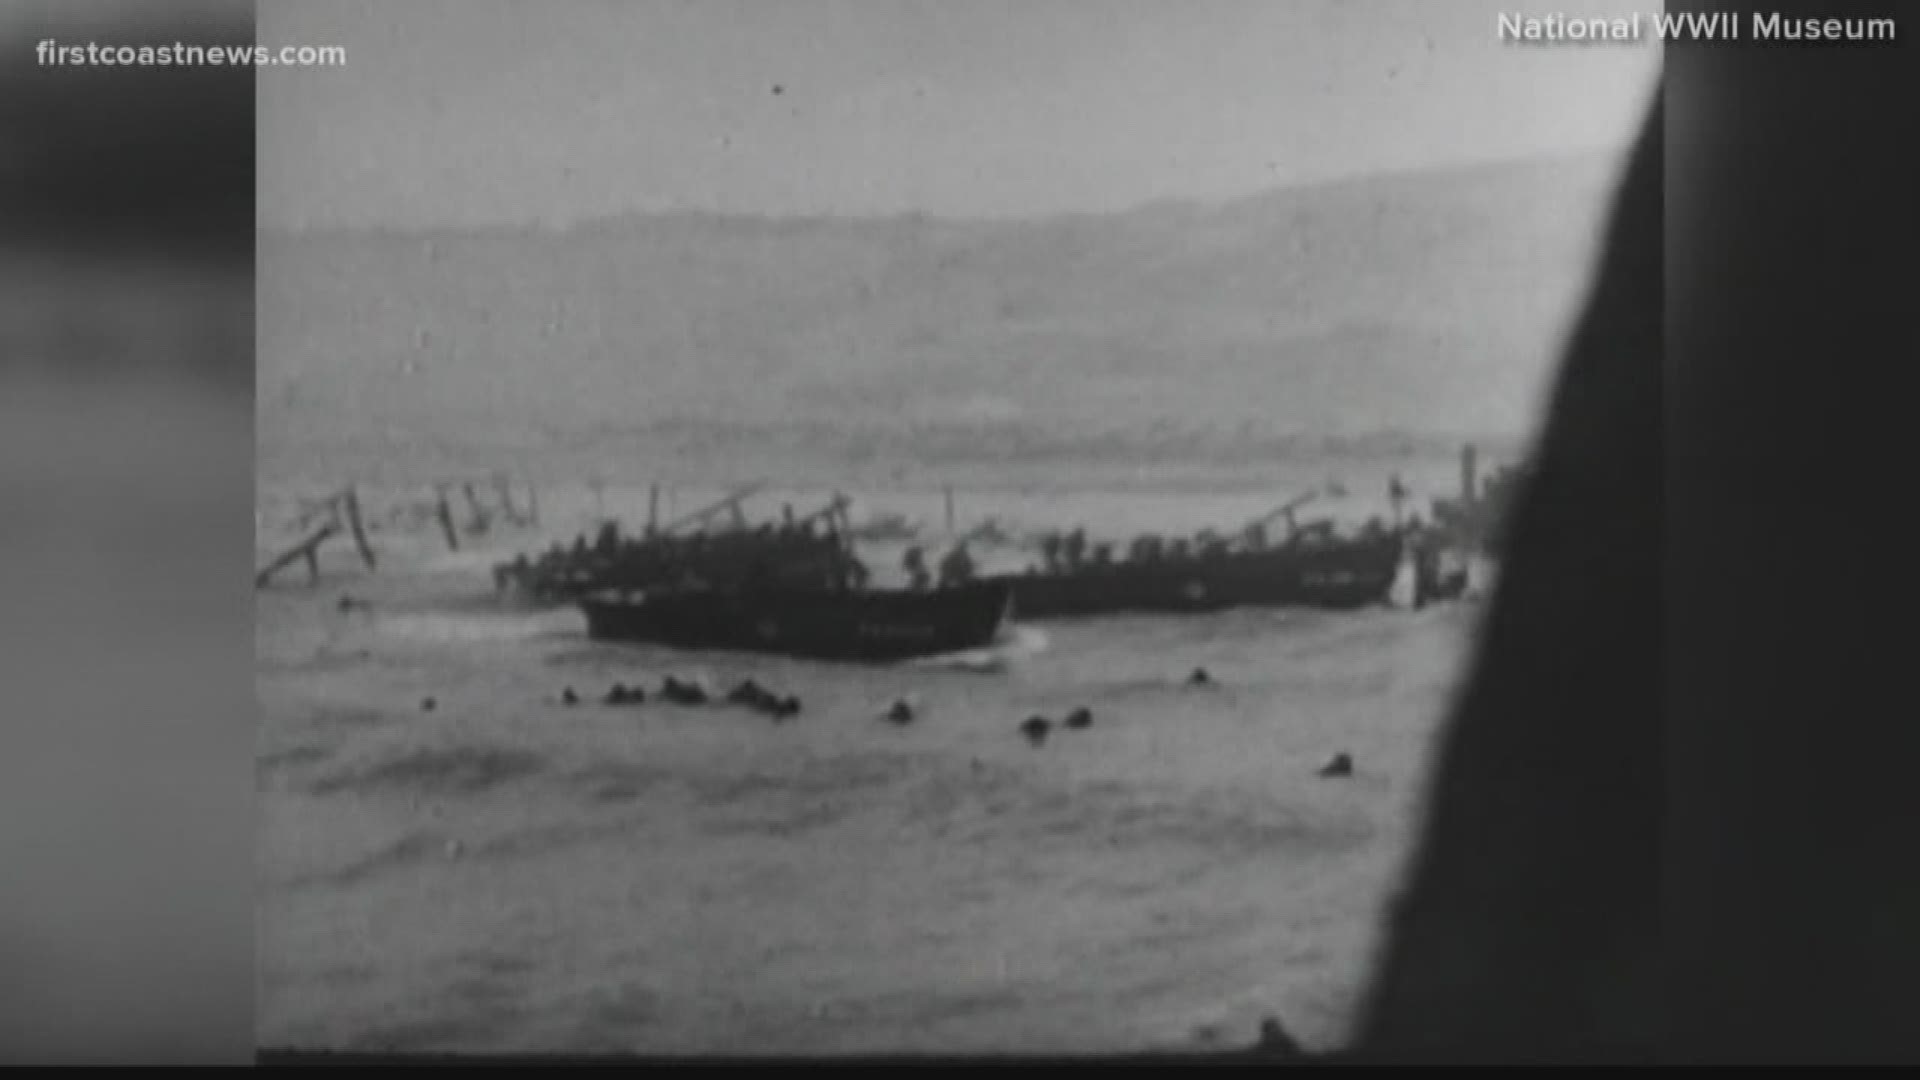 First Coast News explains the critical role the U.S. Navy played in D-Day.